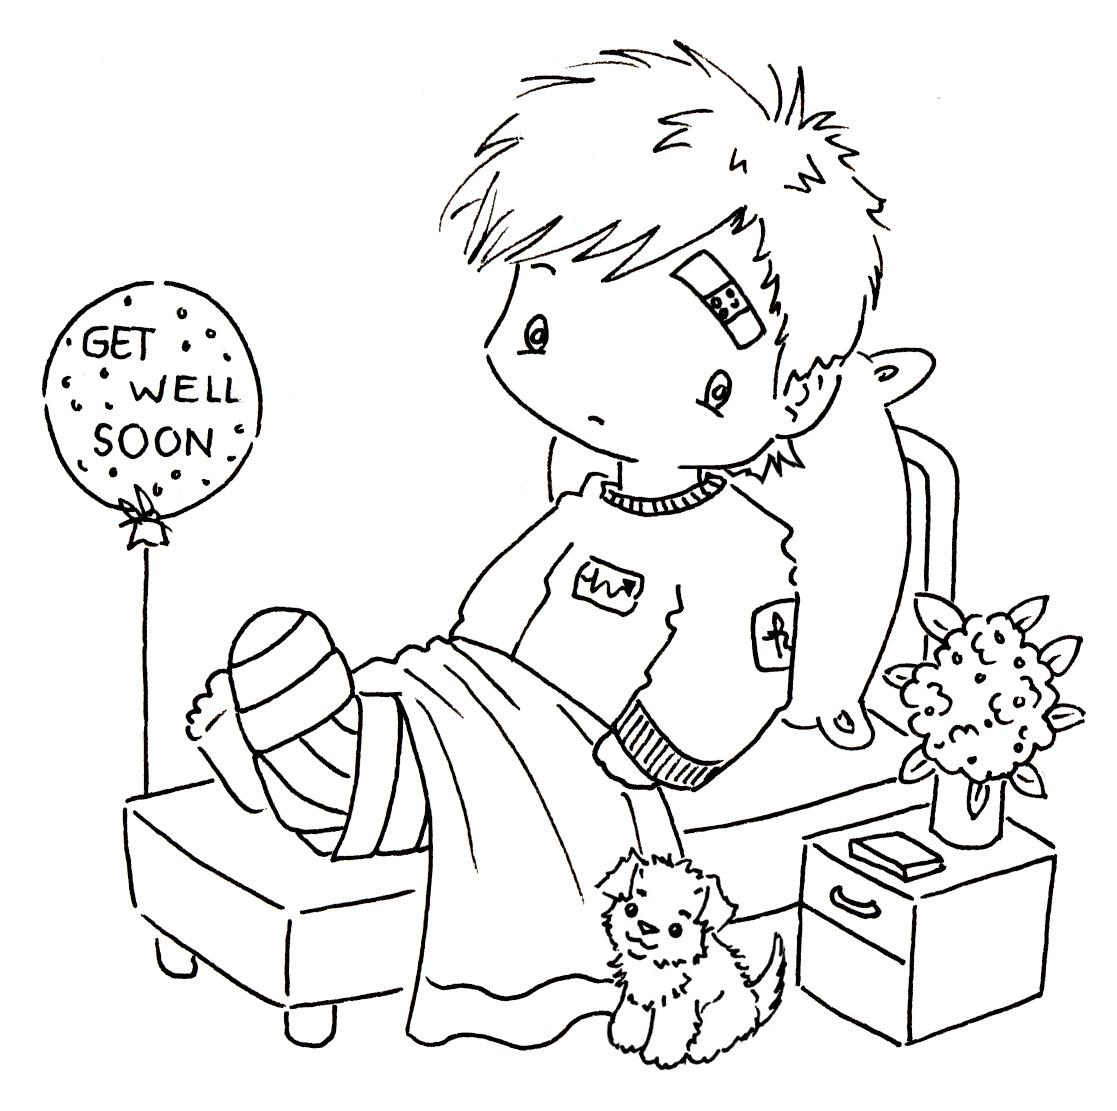 Printable Get Well Cards To Color - Coloring Pages for Kids and ...